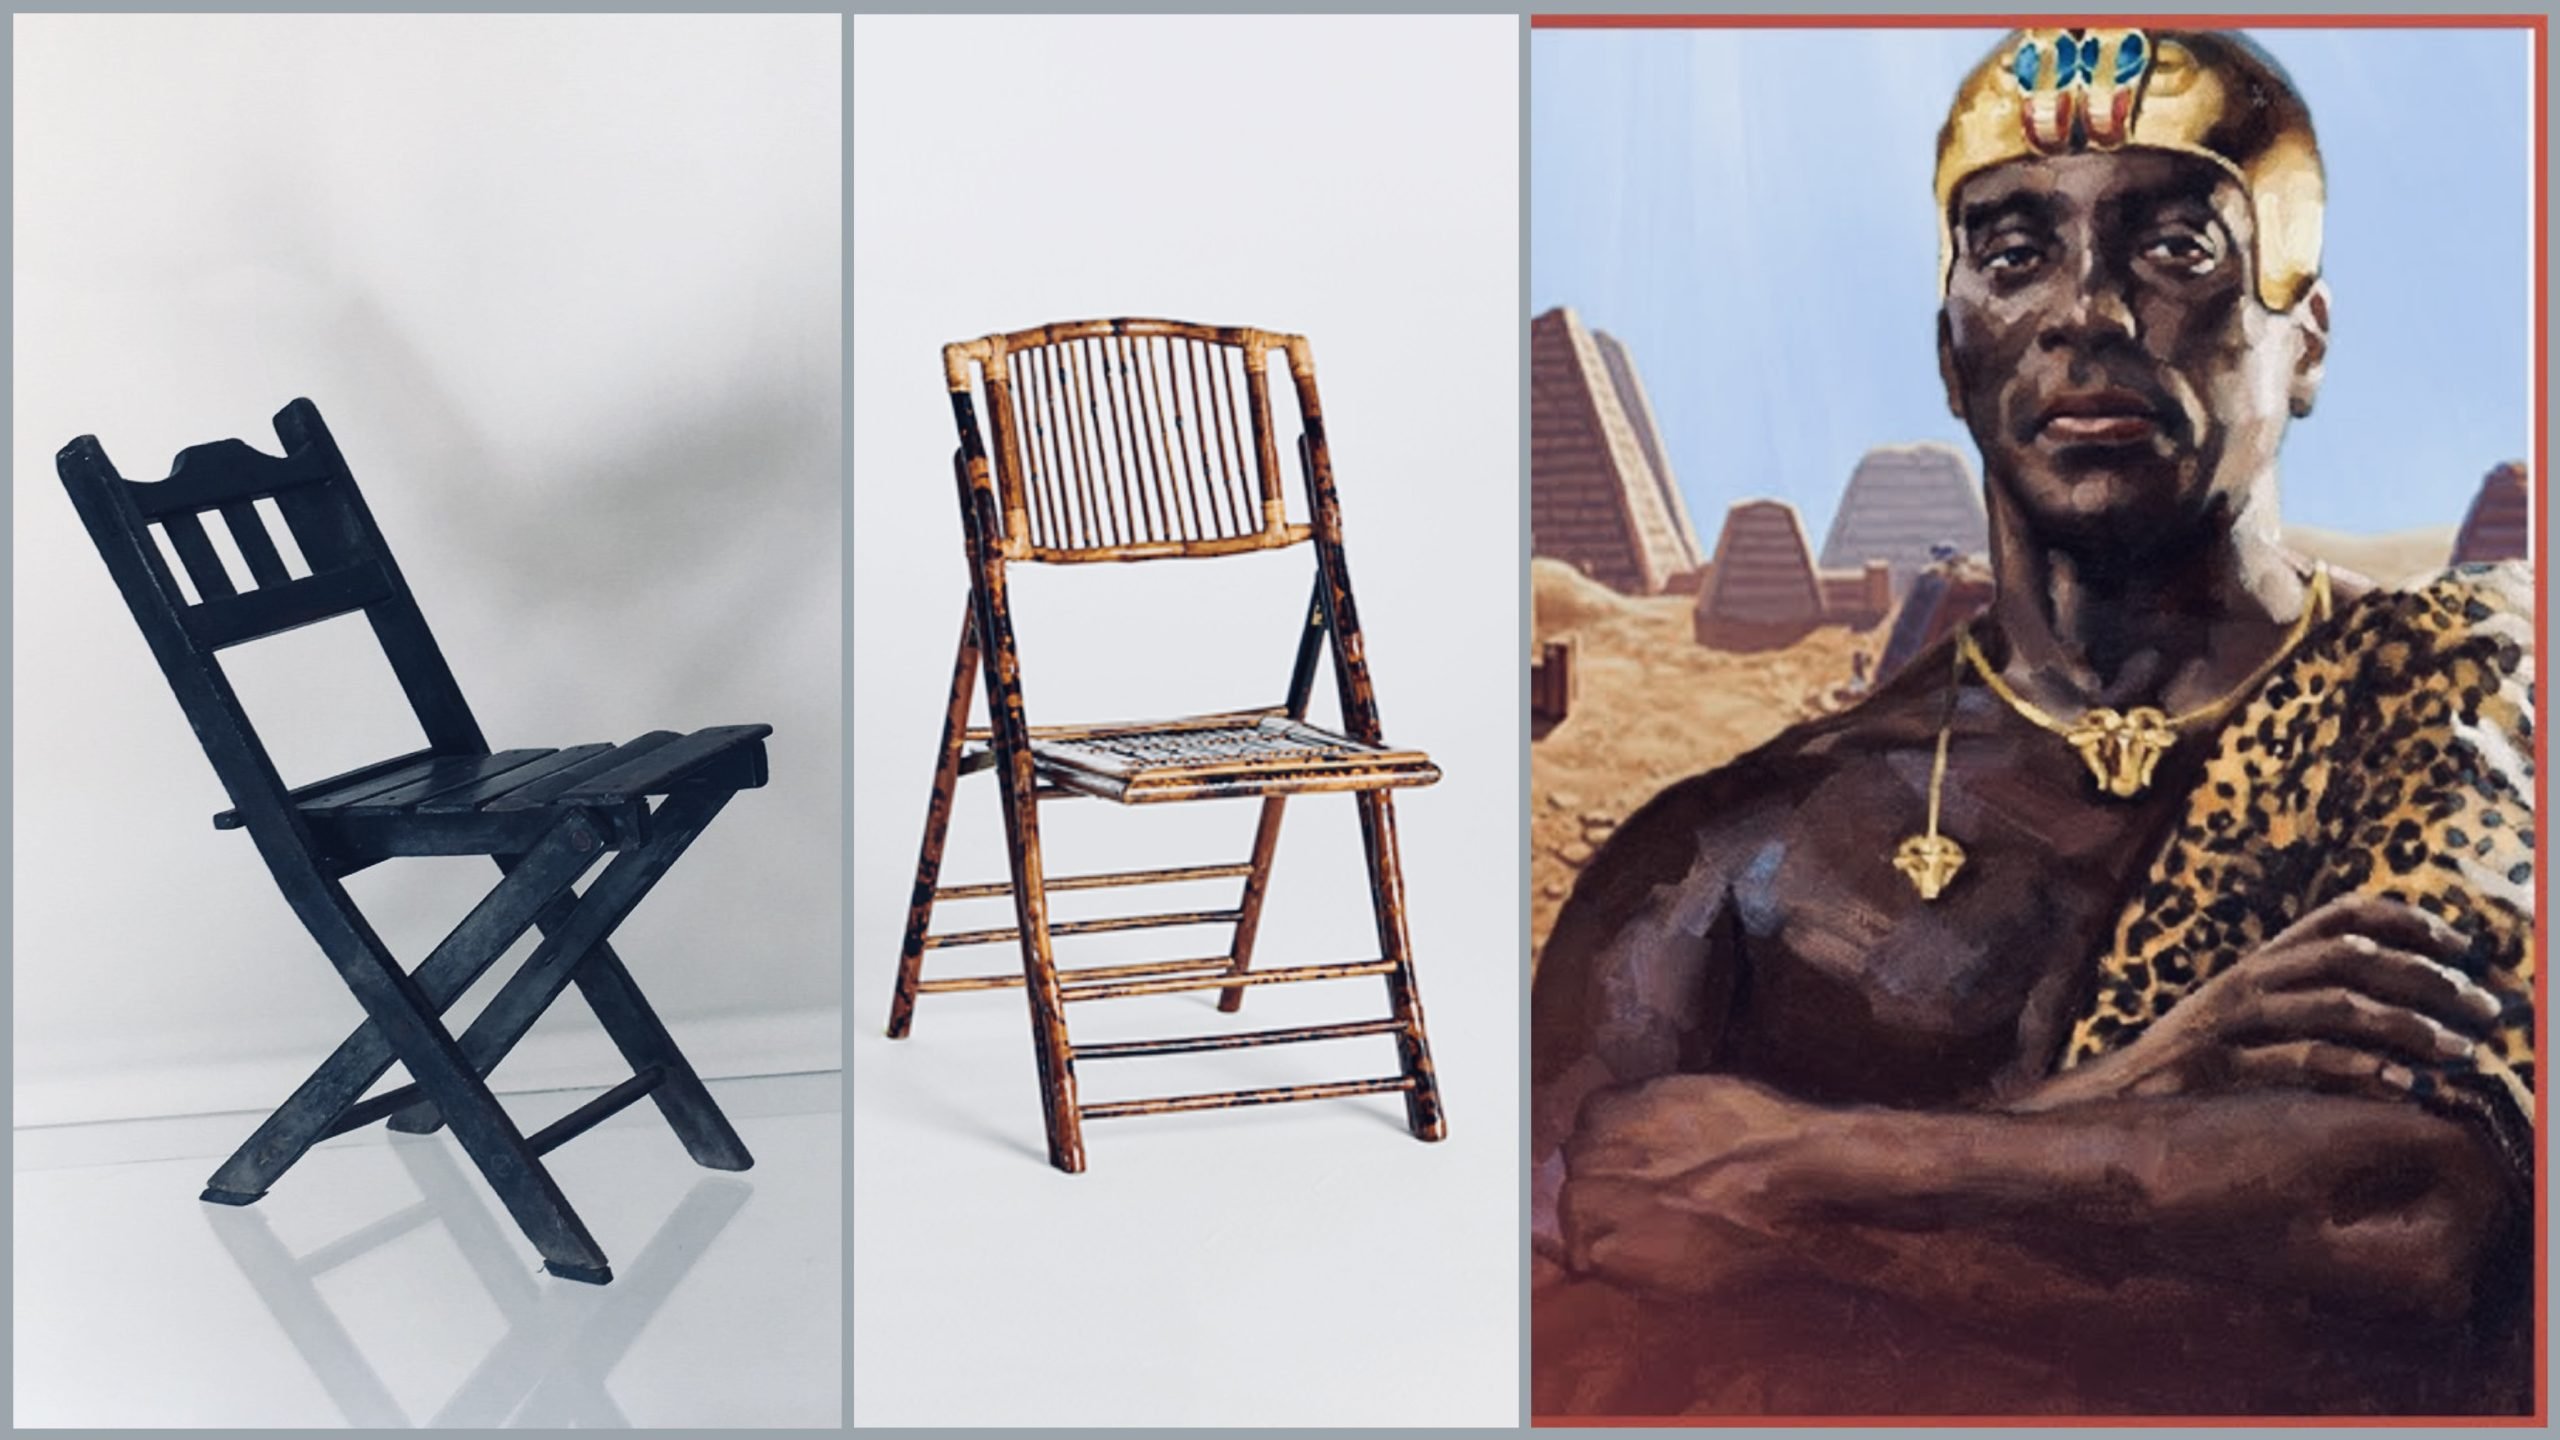 Ancient Egyptians invented Folding Chairs 3000 yrs ago